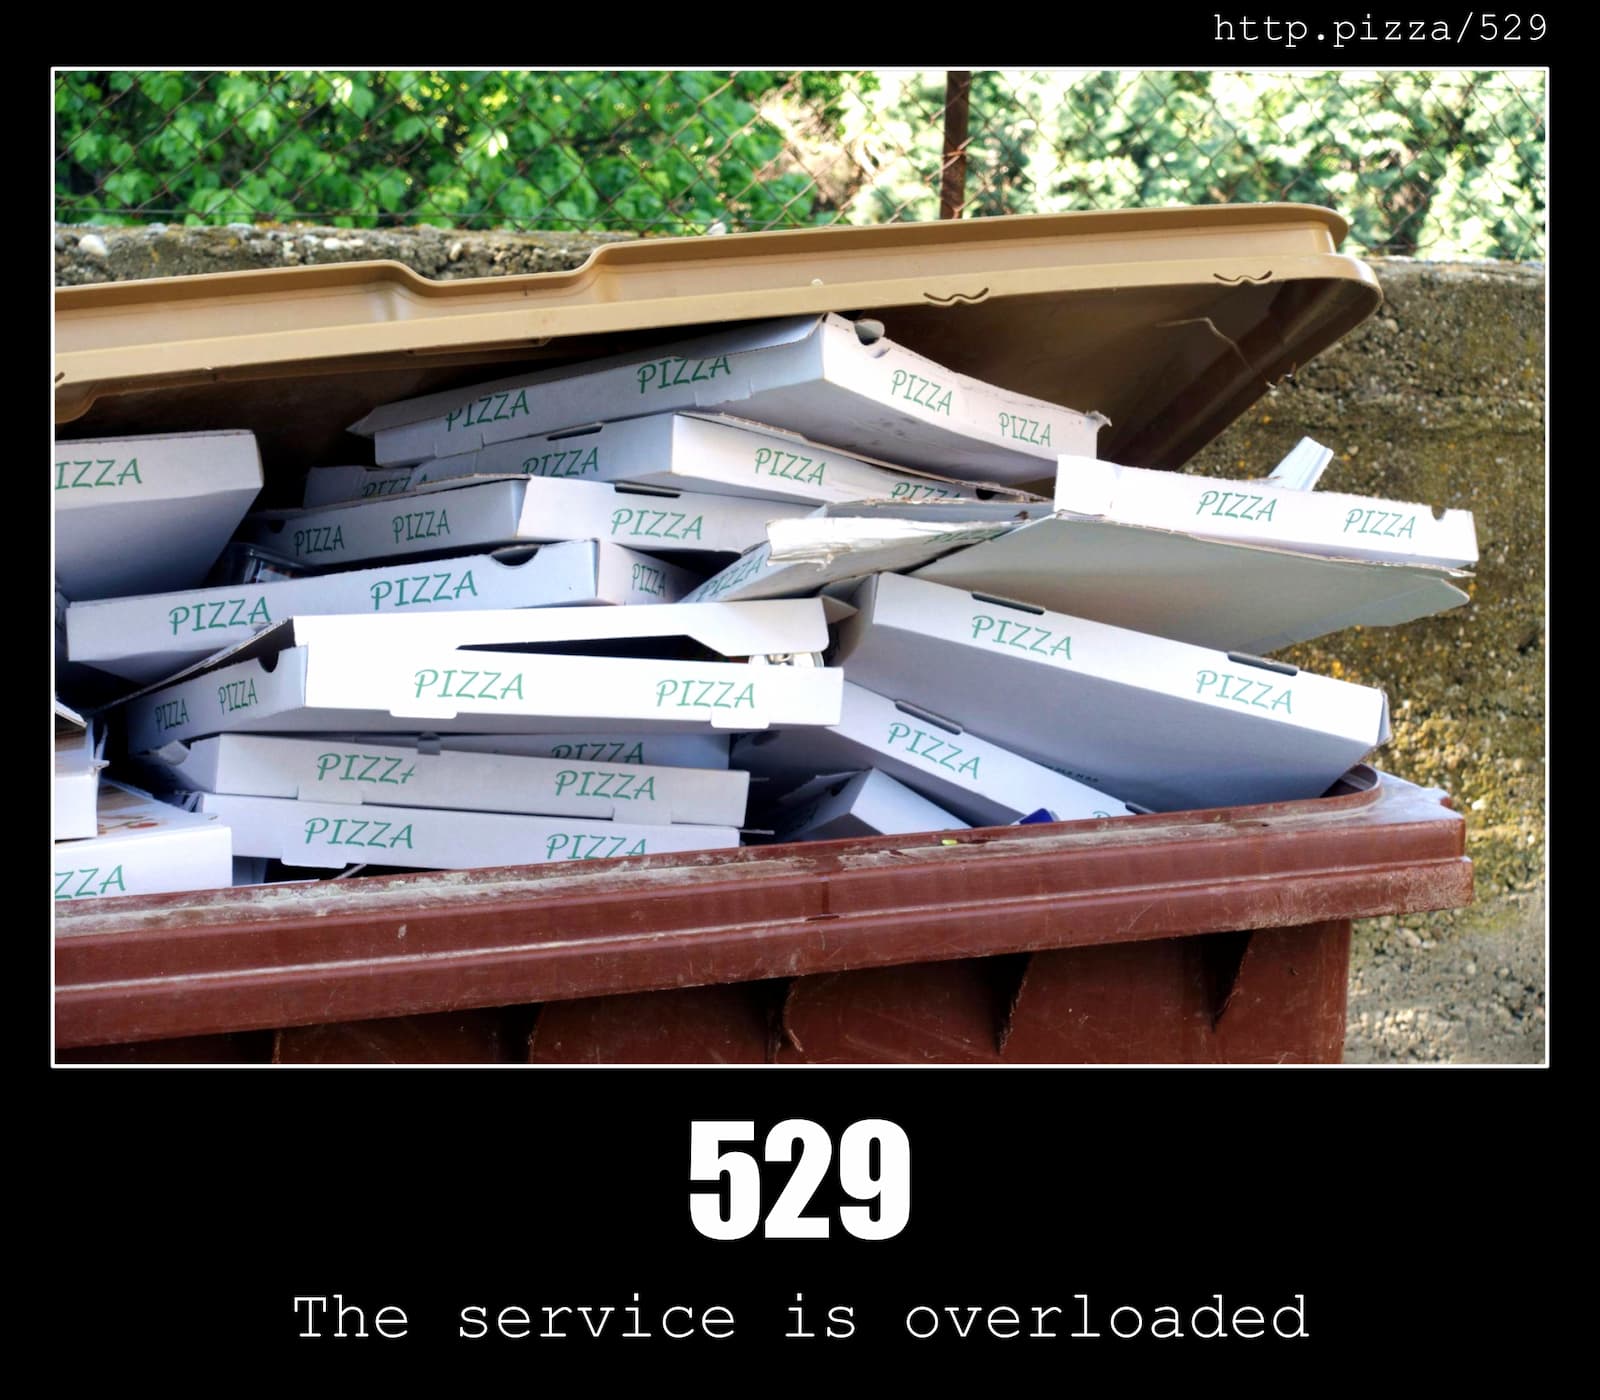 HTTP Status Code 529 The service is overloaded & Pizzas